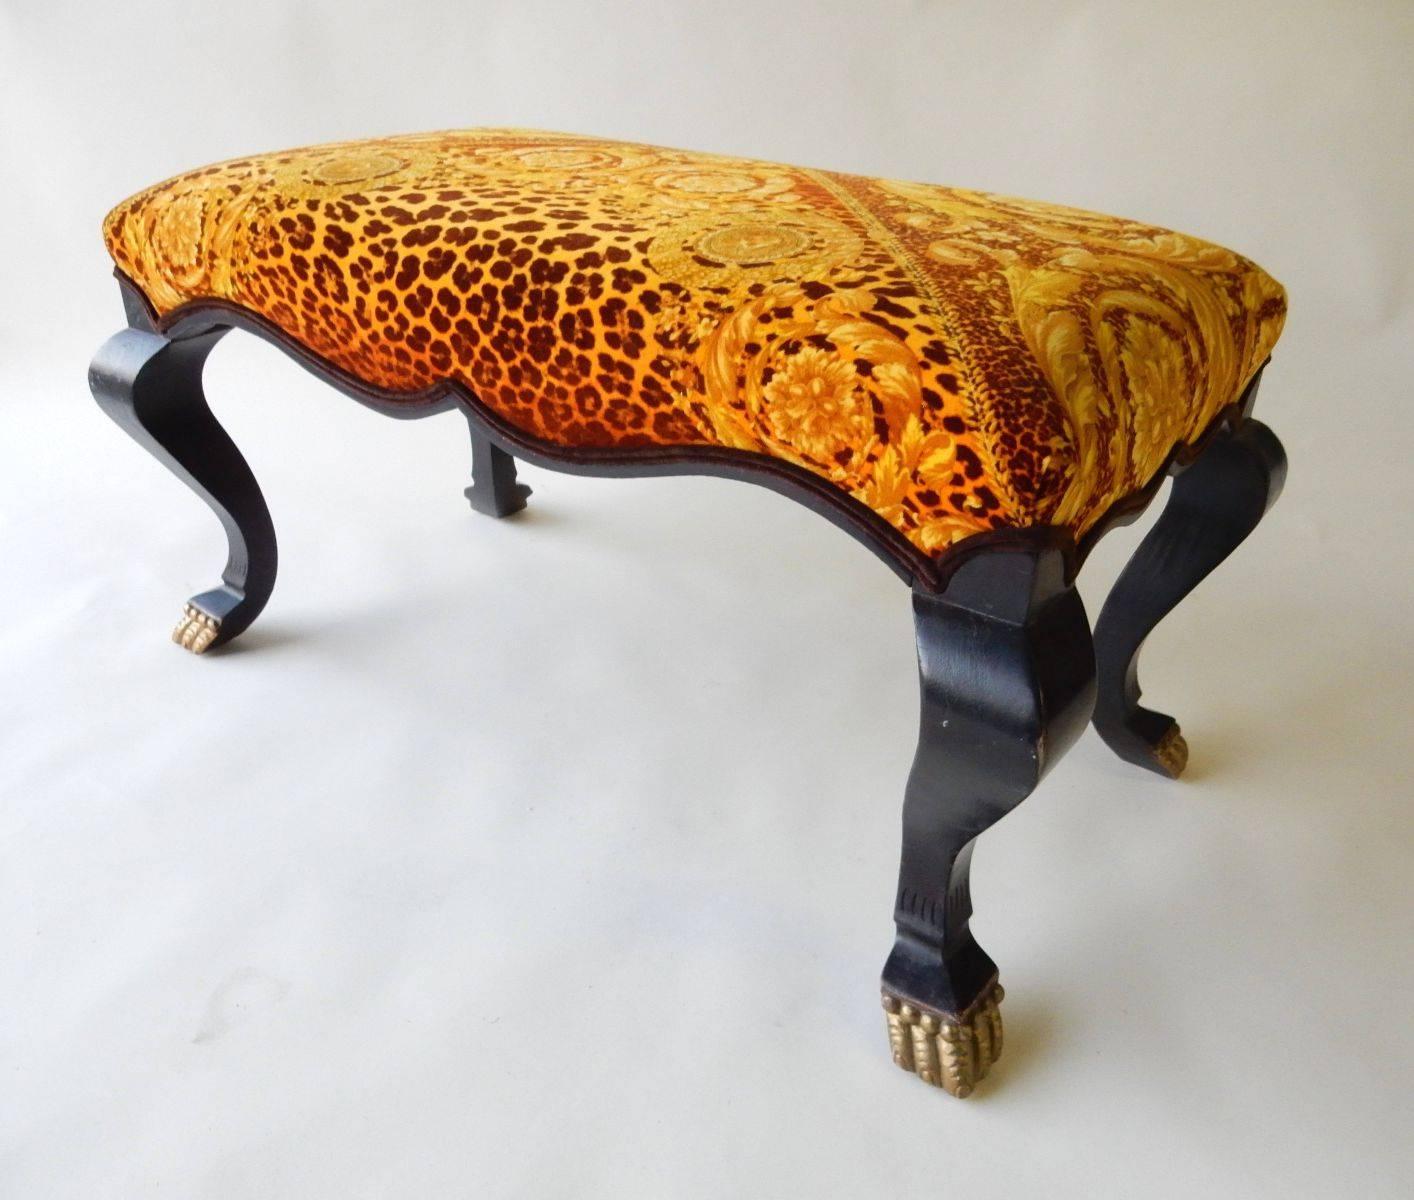 This fabulous vintage bench with claw feet is upholstered in authentic (signed) vintage Gianni Versace' velvet leopard print fabric.
An exceptional one of a kind piece.